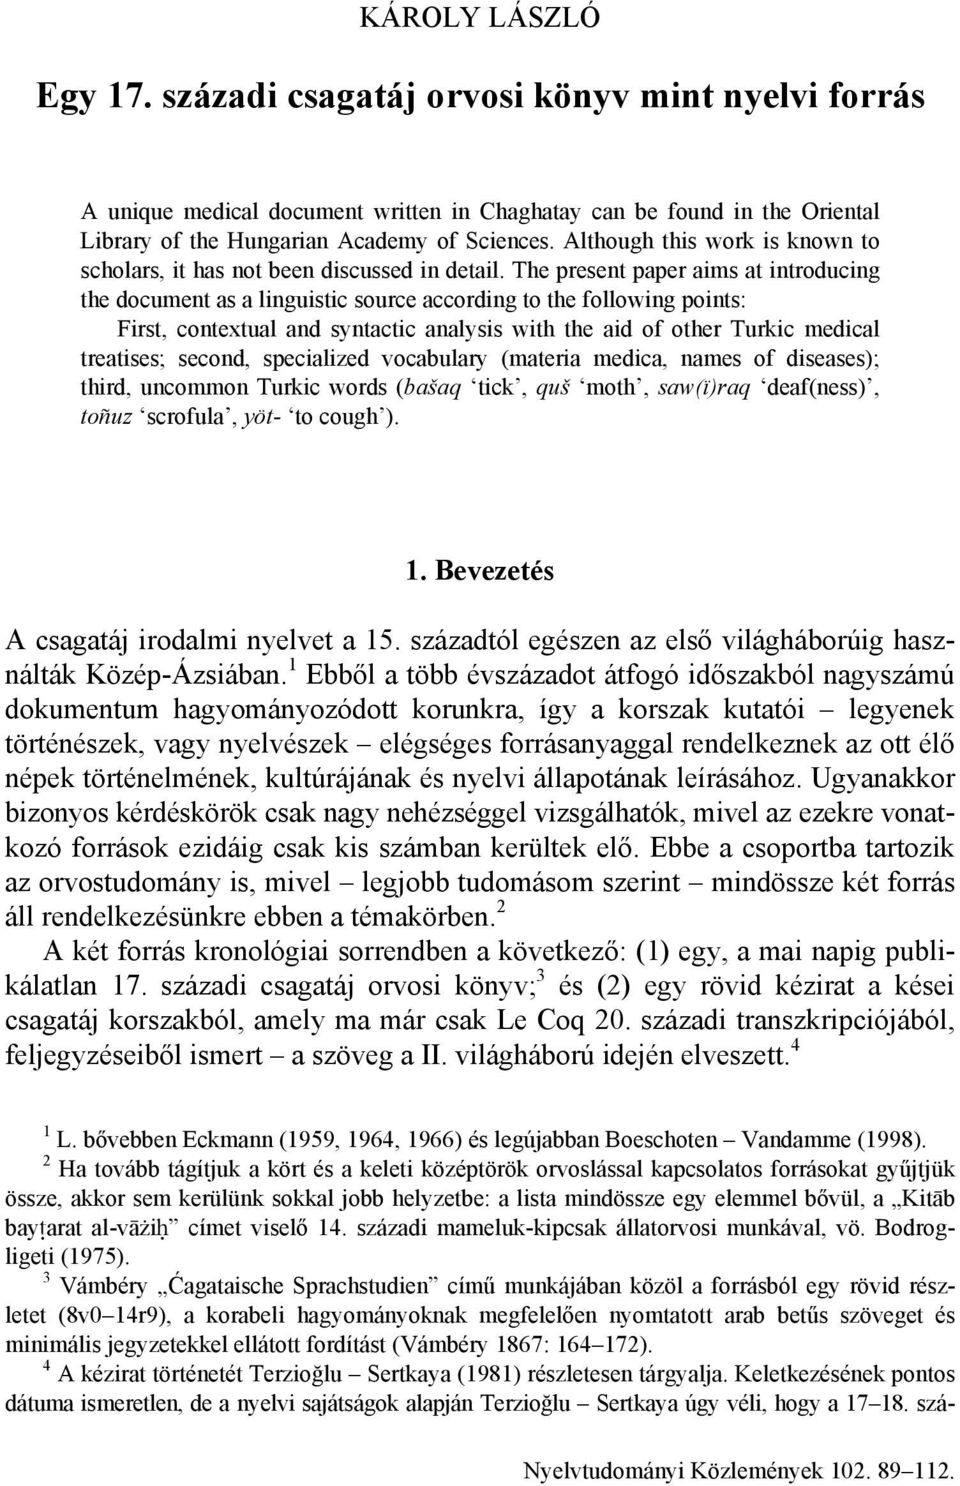 The present paper aims at introducing the document as a linguistic source according to the following points: First, contextual and syntactic analysis with the aid of other Turkic medical treatises;